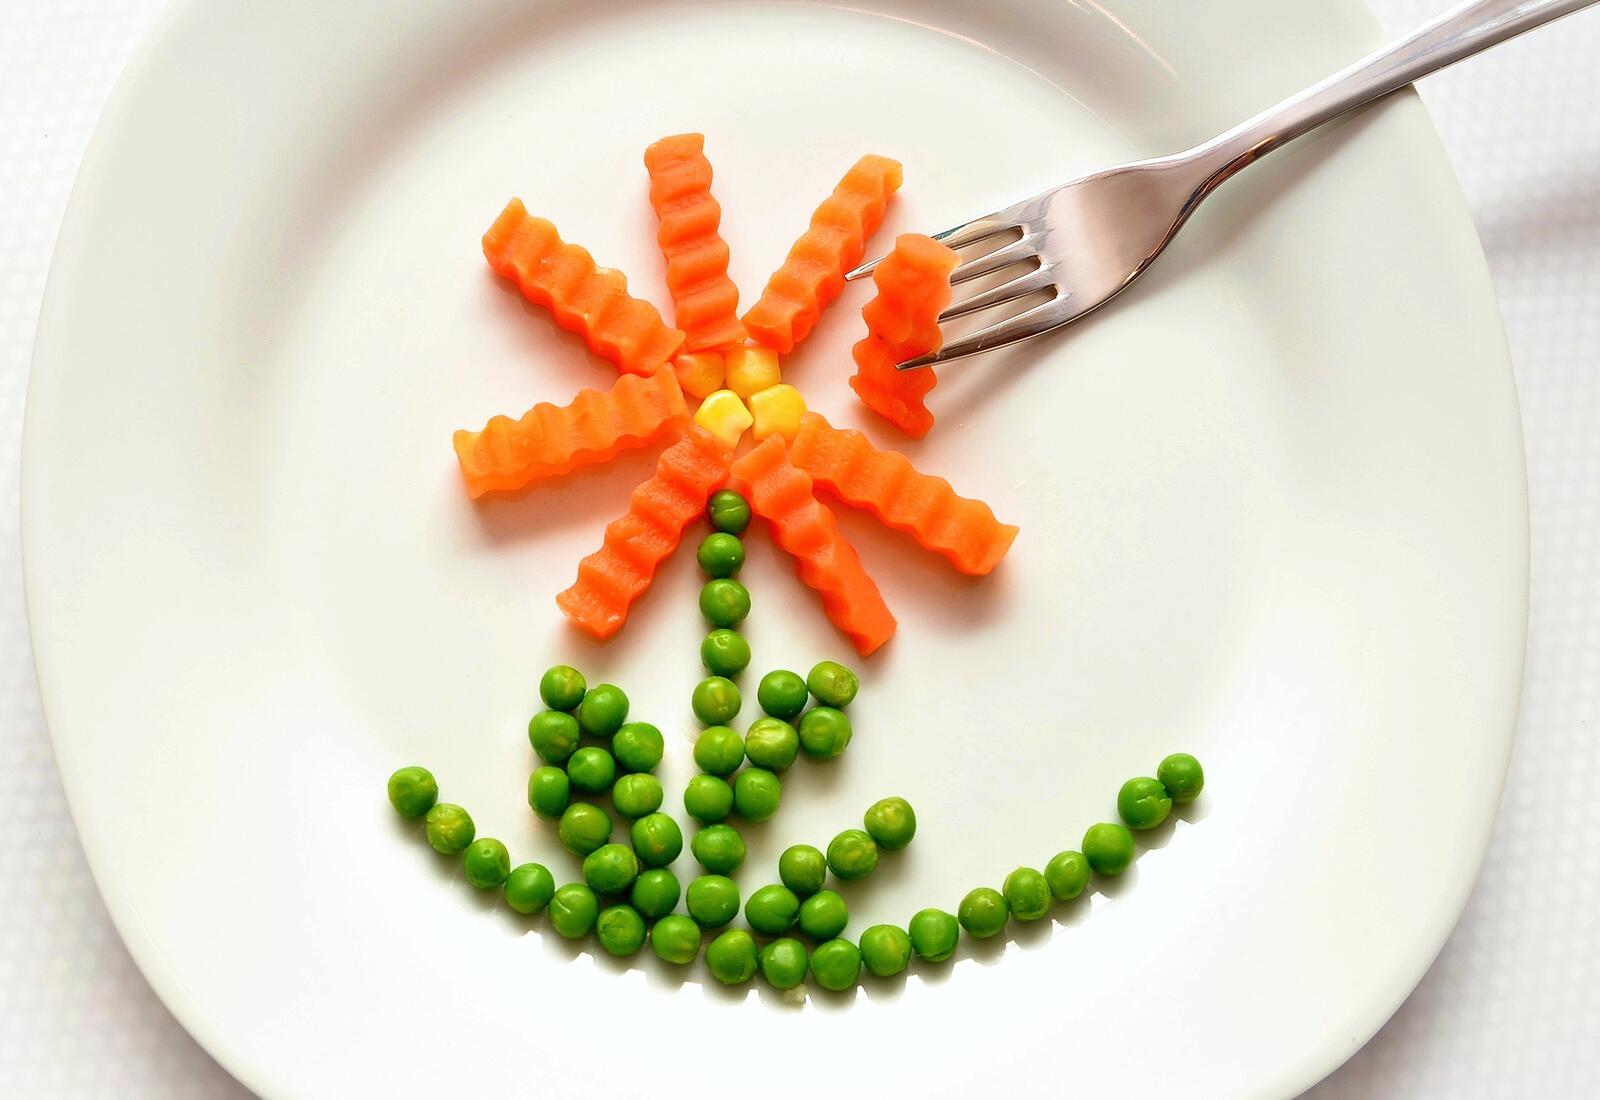 Free photo A palm tree of carrots and peas on a white plate